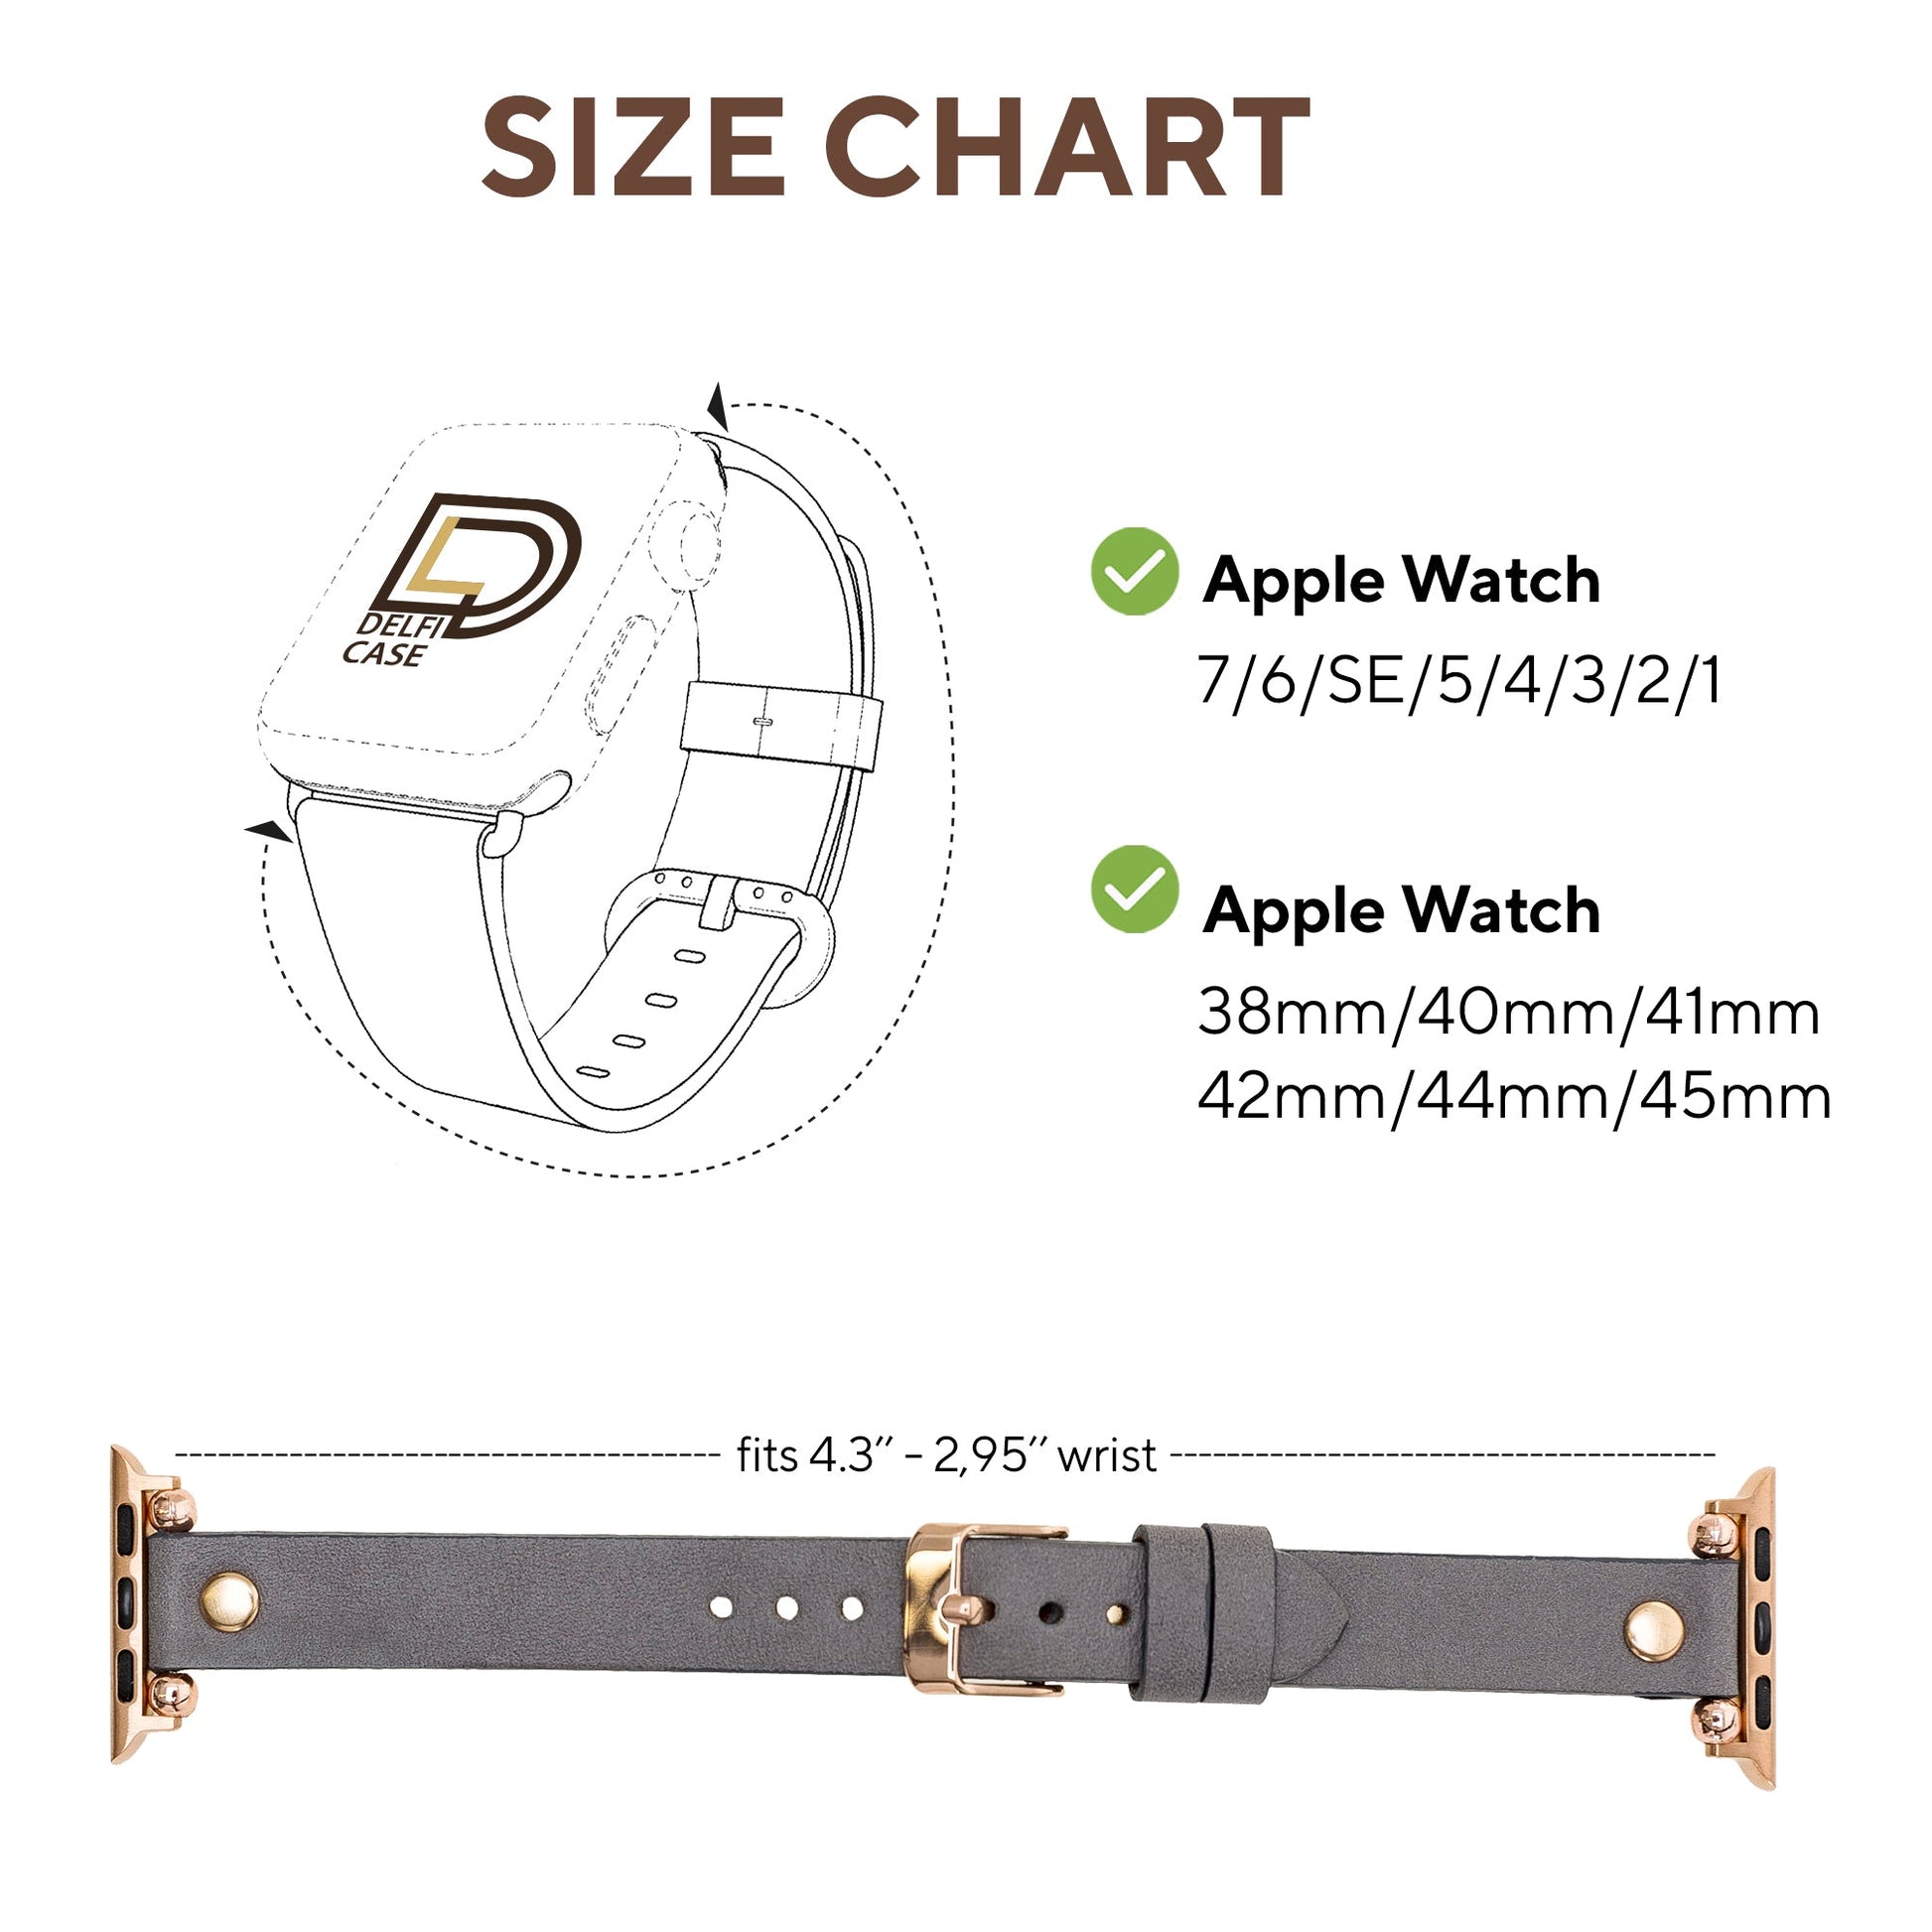 GRAY LV APPLE WATCH STRAP BAND (Size: 38mm, 40mm, 41mm)